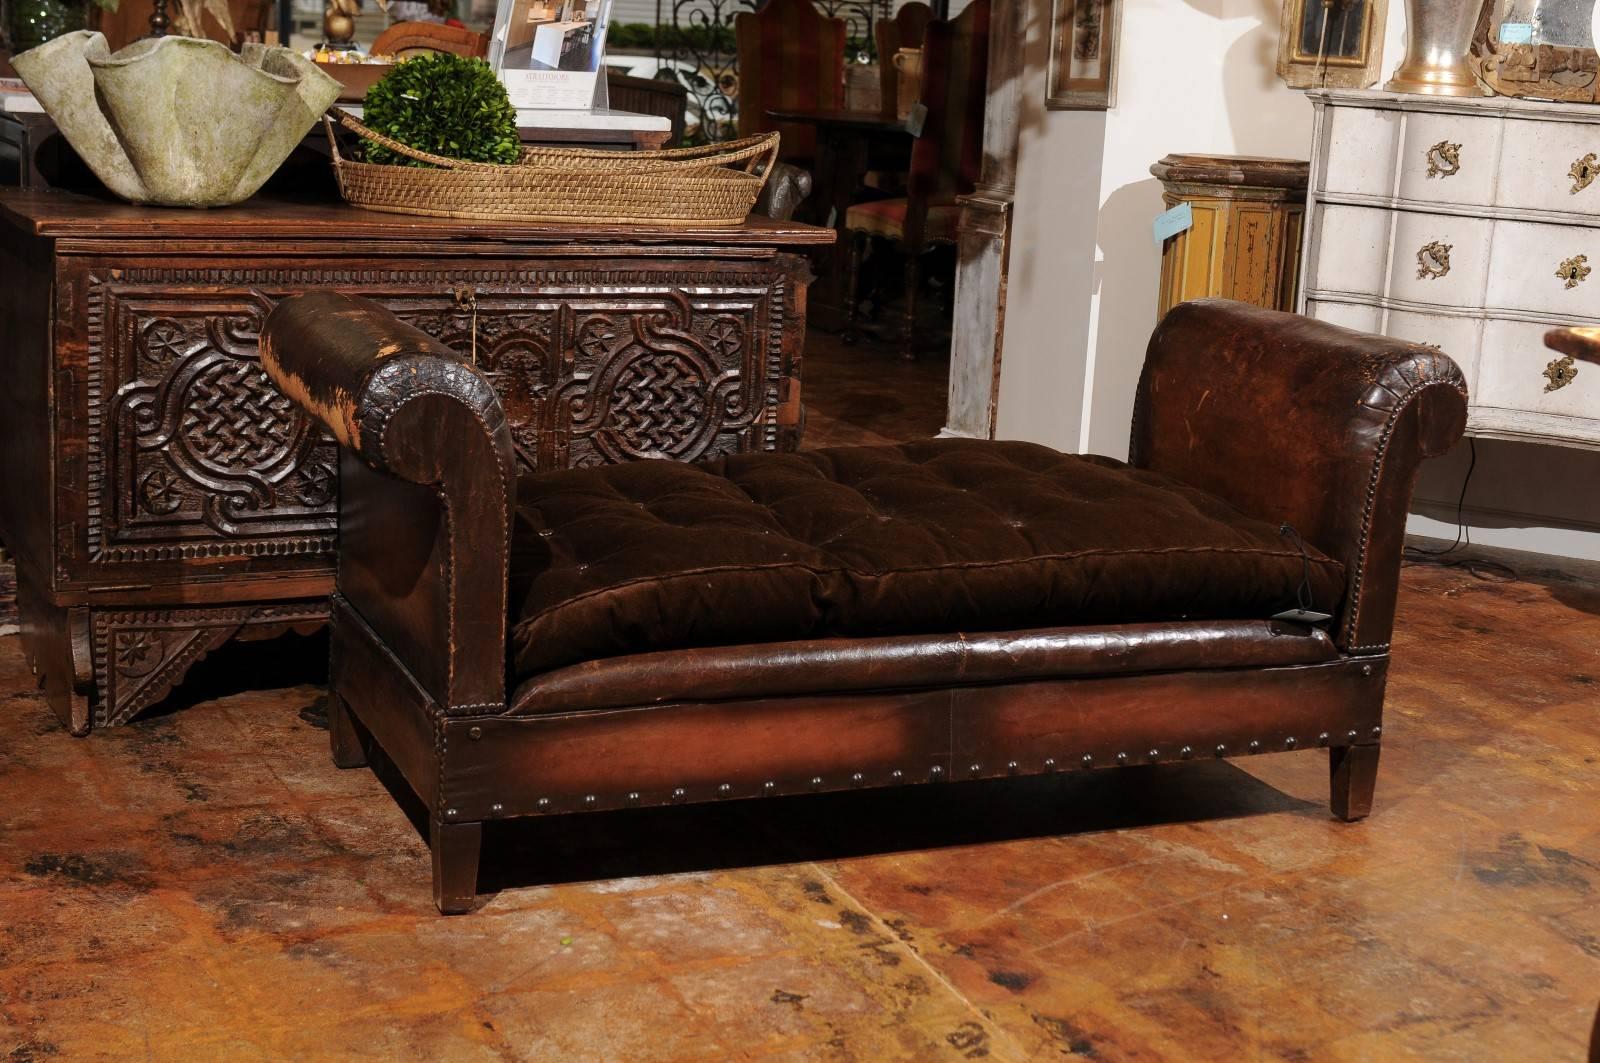 A French Turn of the Century leather backless bench with folding rolled arms from the late 19th, early 20th century. Born during the Belle Epoque, this French brown leather bench features two scrolled arms that fold down, conveniently allowing the